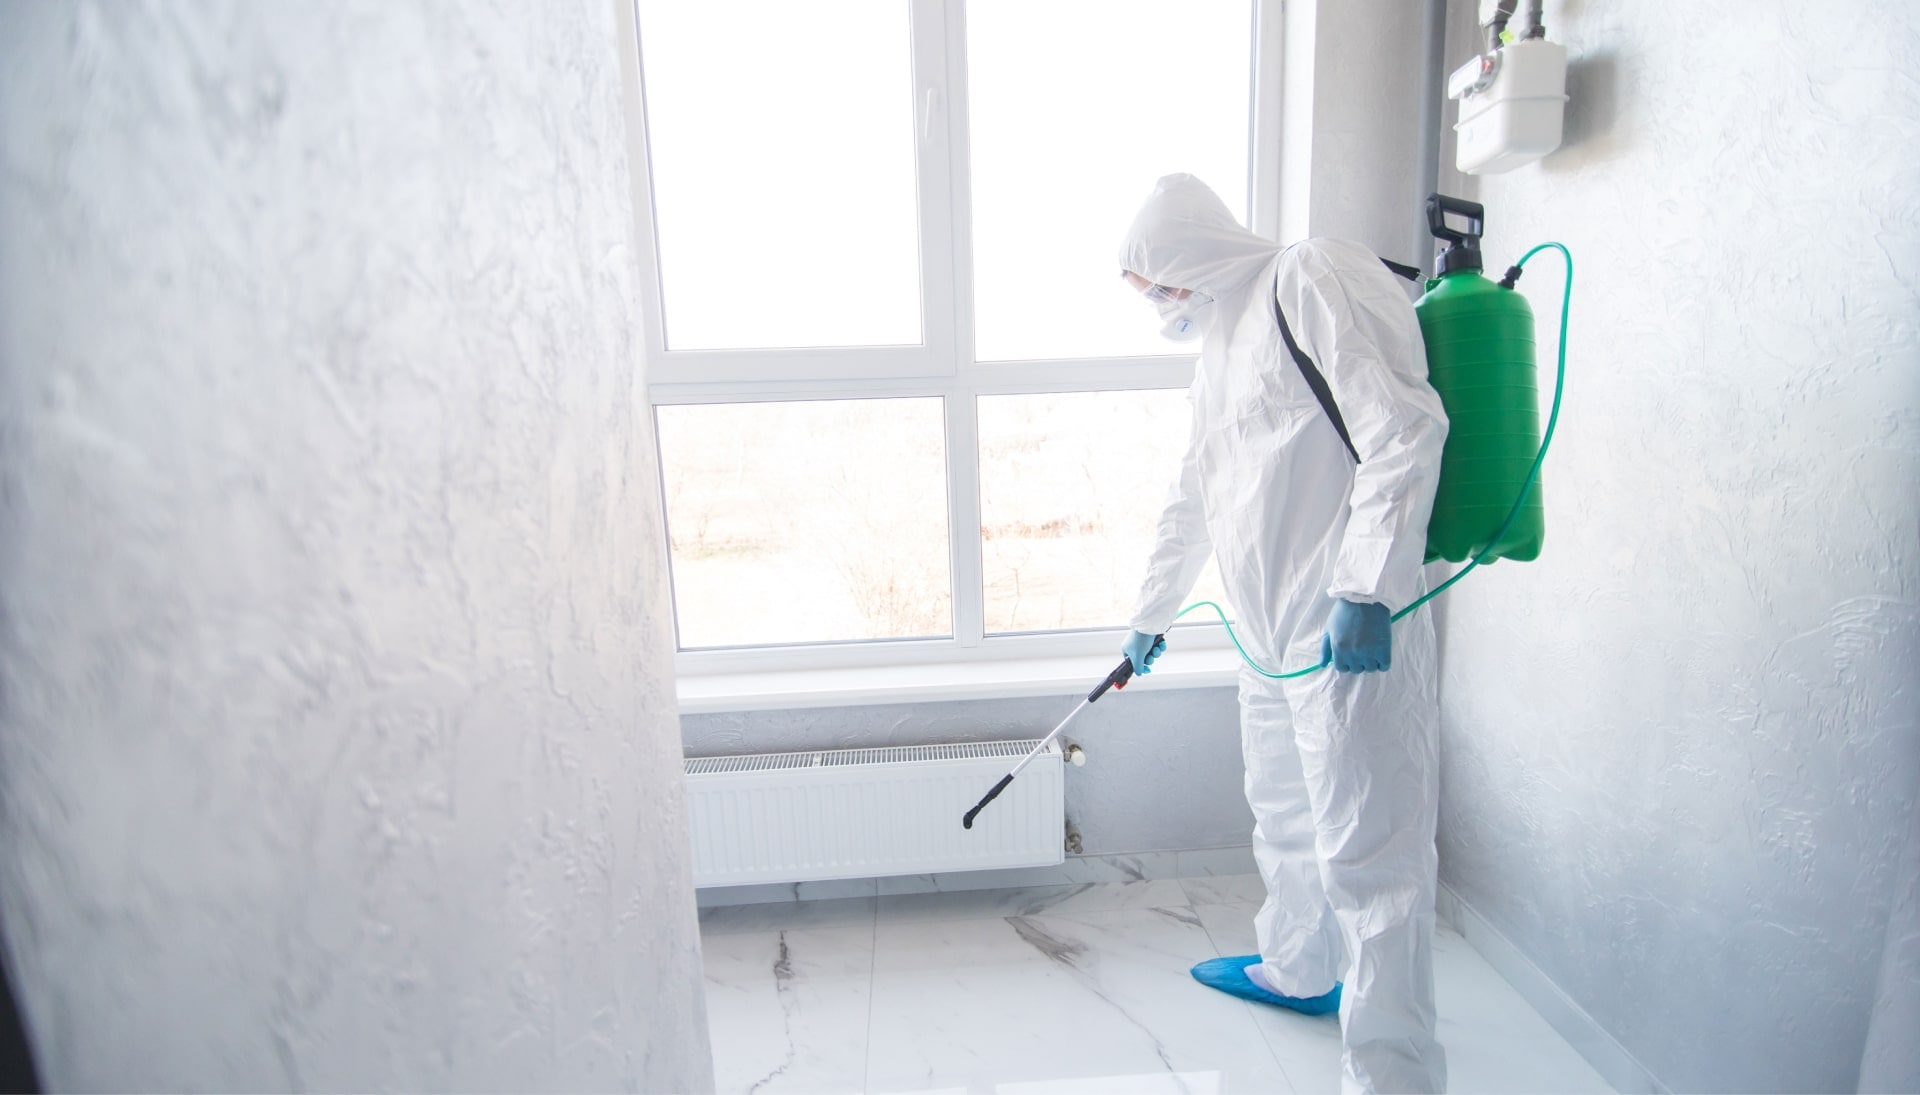 Mold removal technician spraying chemical.